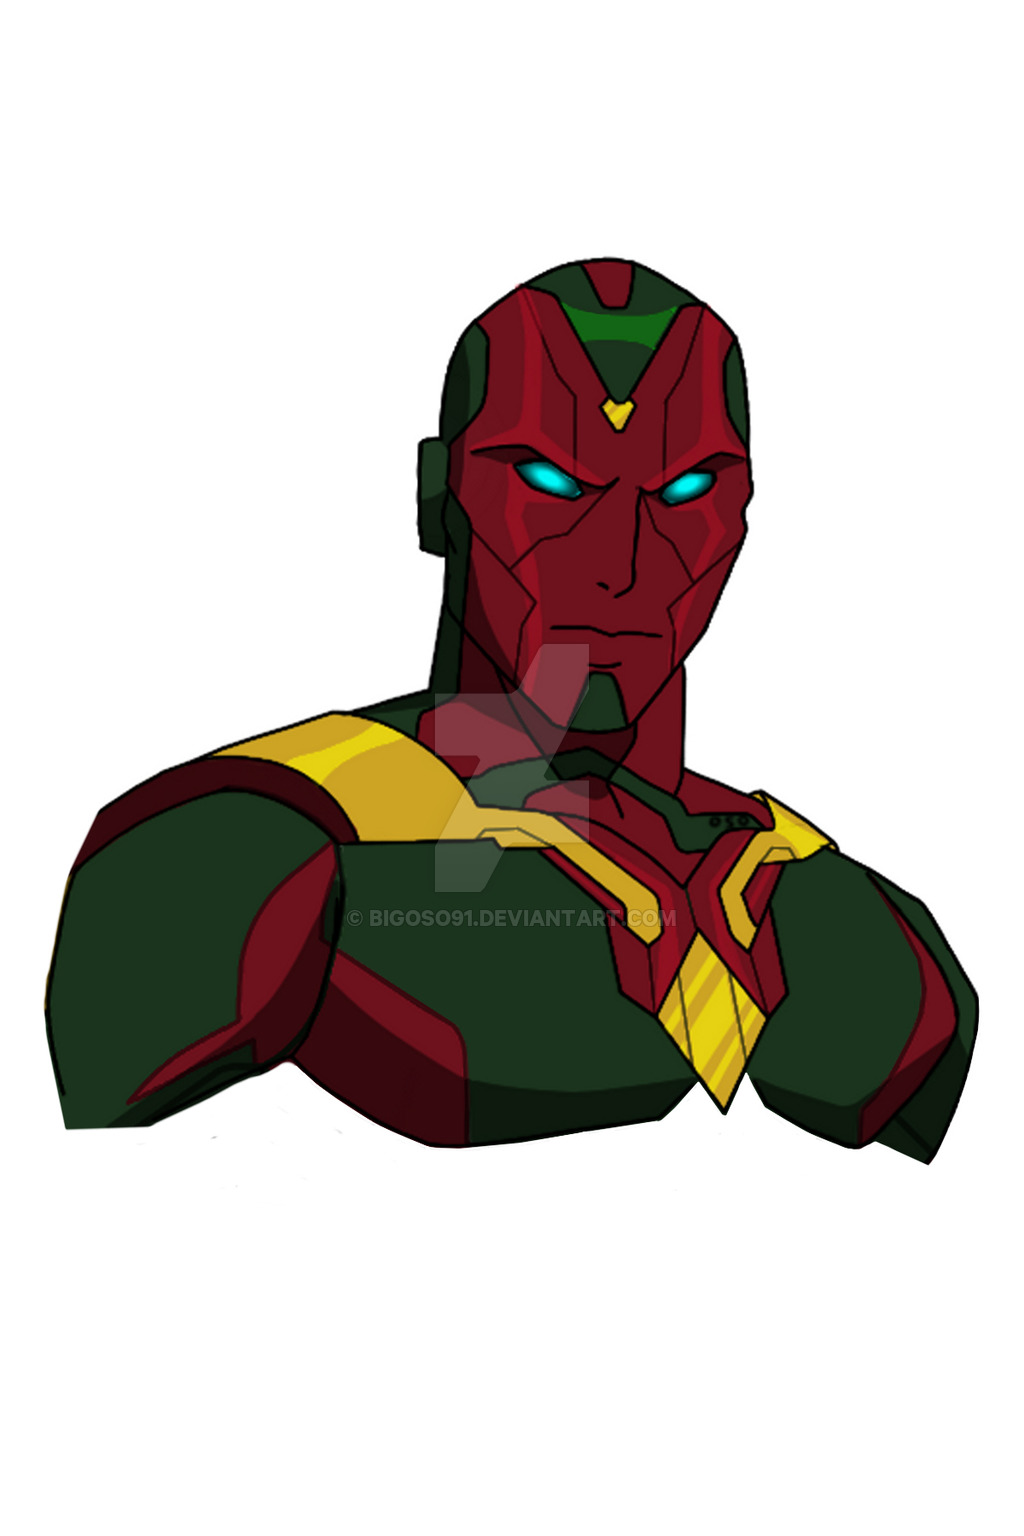 . ClipartLook.com animated Vision avengers age of ultron Hb by bigoso91